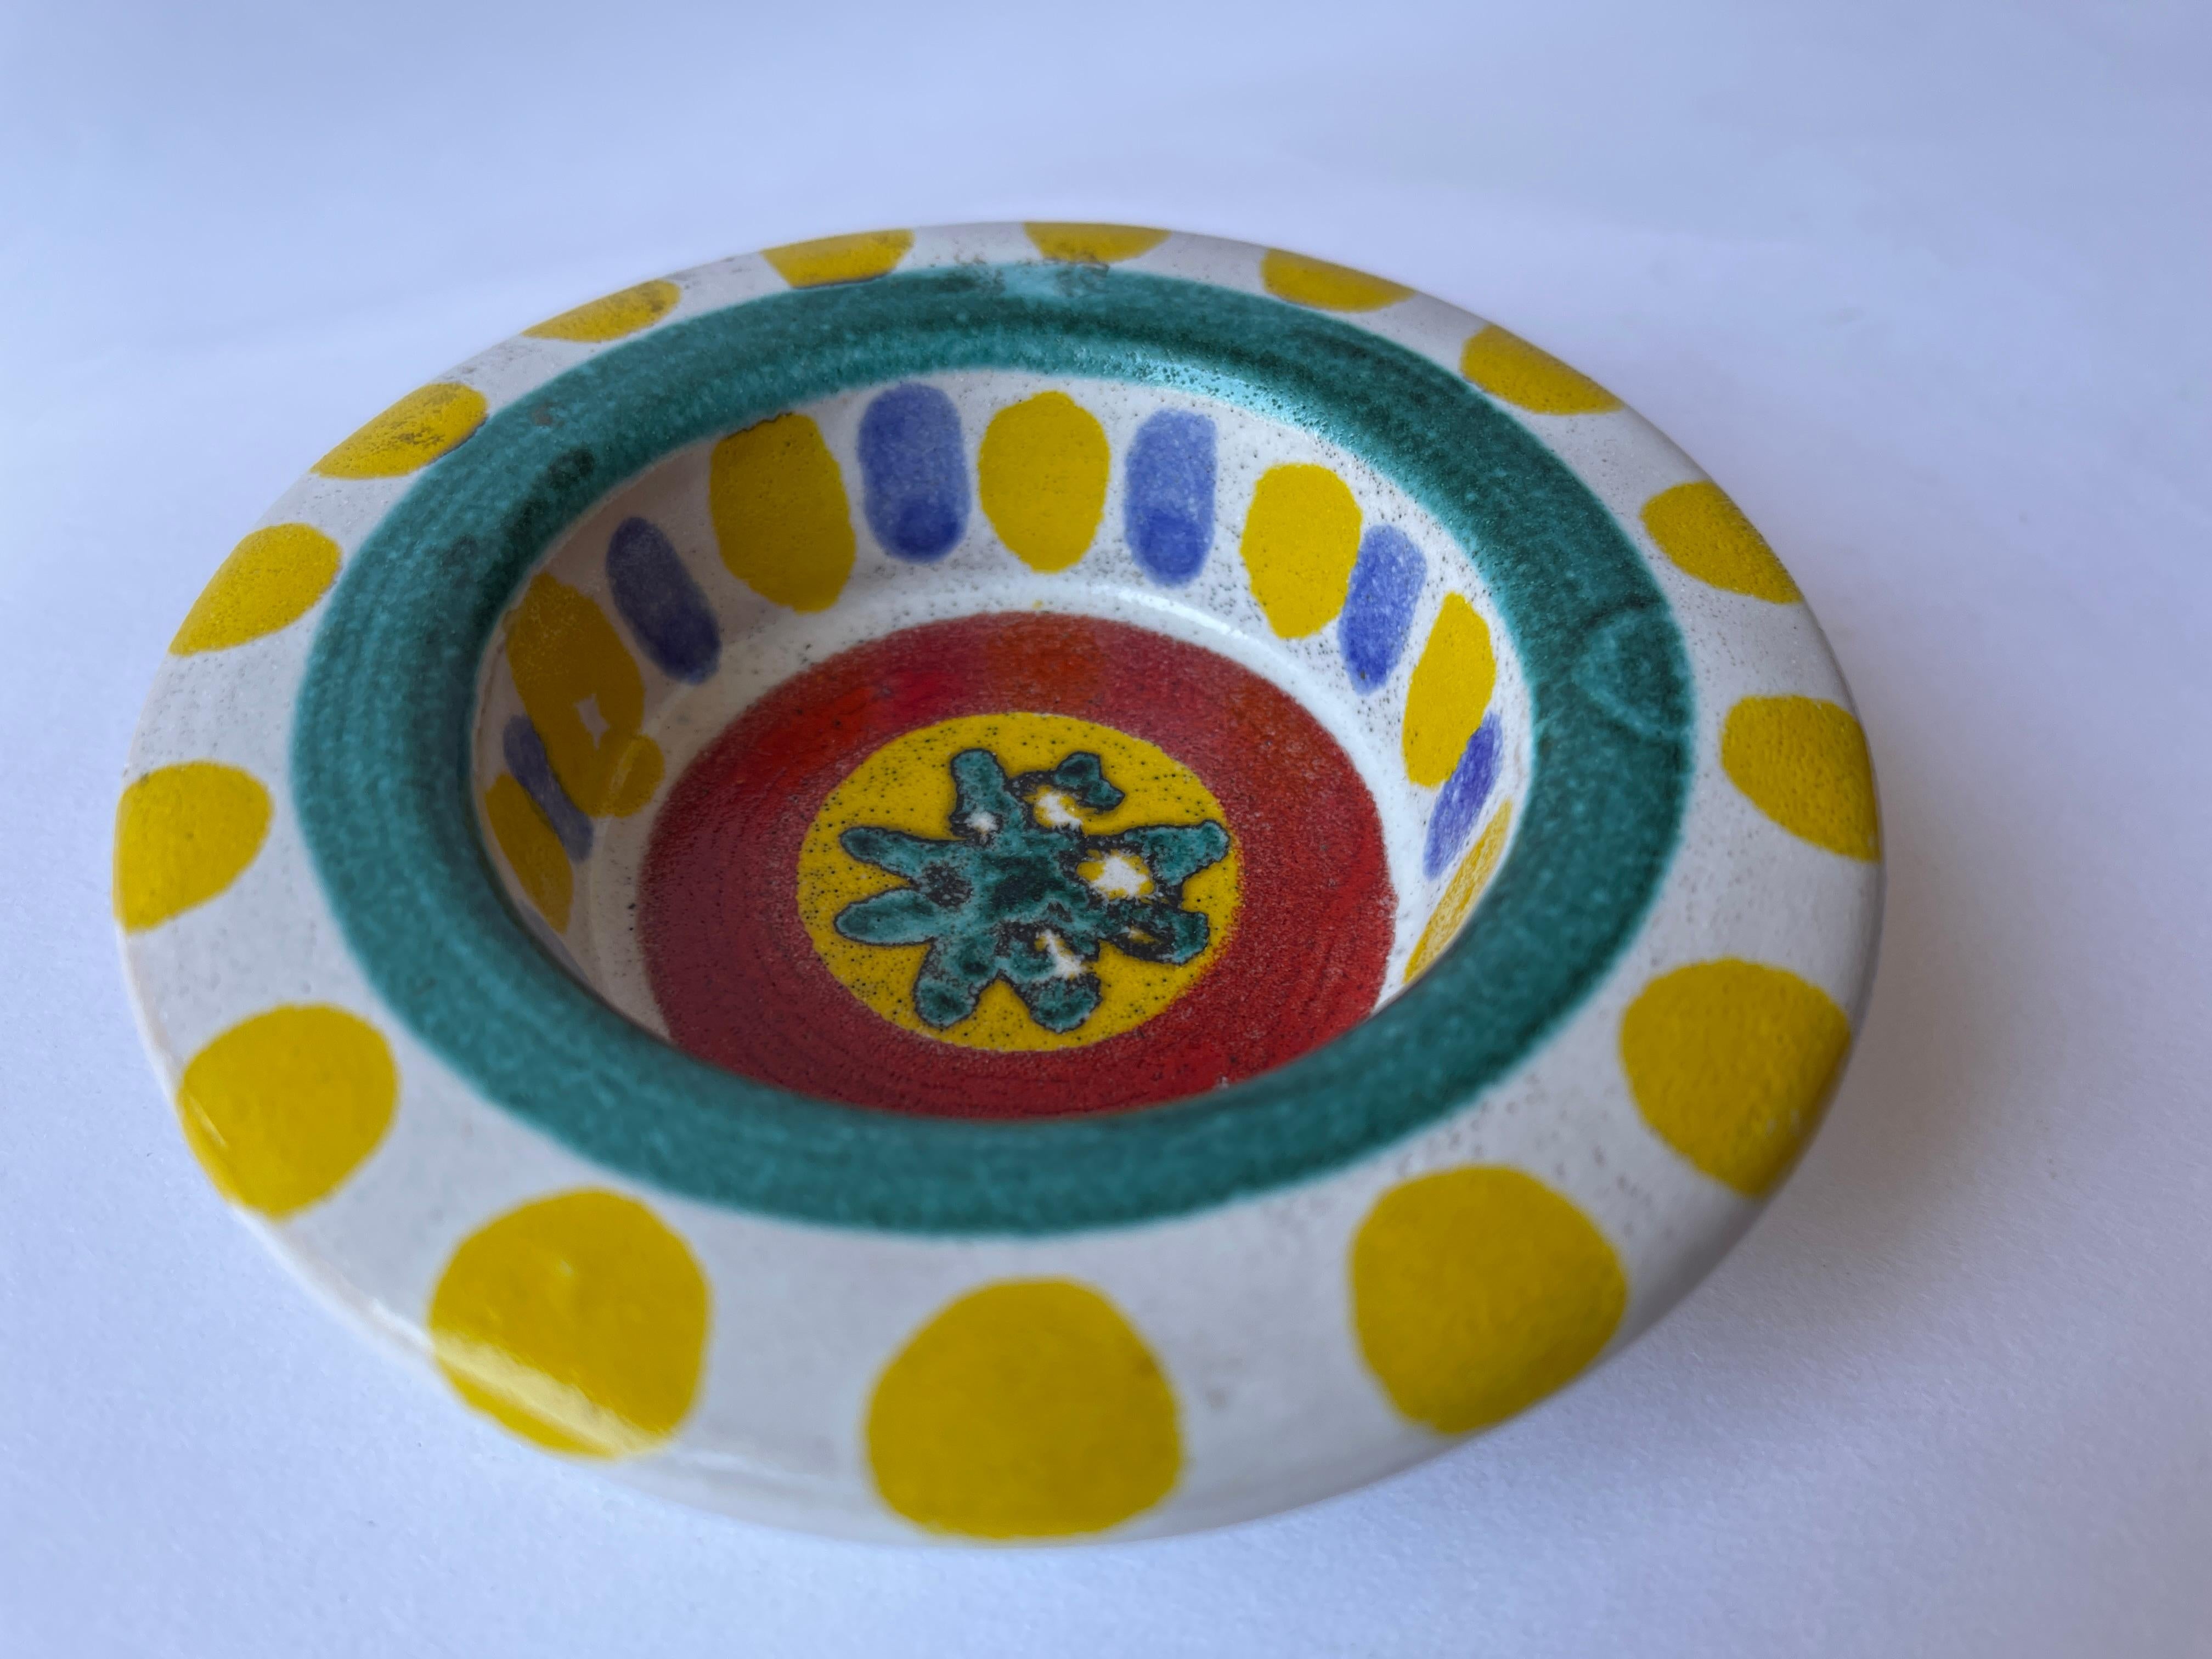 Italian 1960's hand painted colorful ceramic dish by Giovanni DeSimone, hand crafted in Italy. Signed on underside, DeSimone, Italy 60.